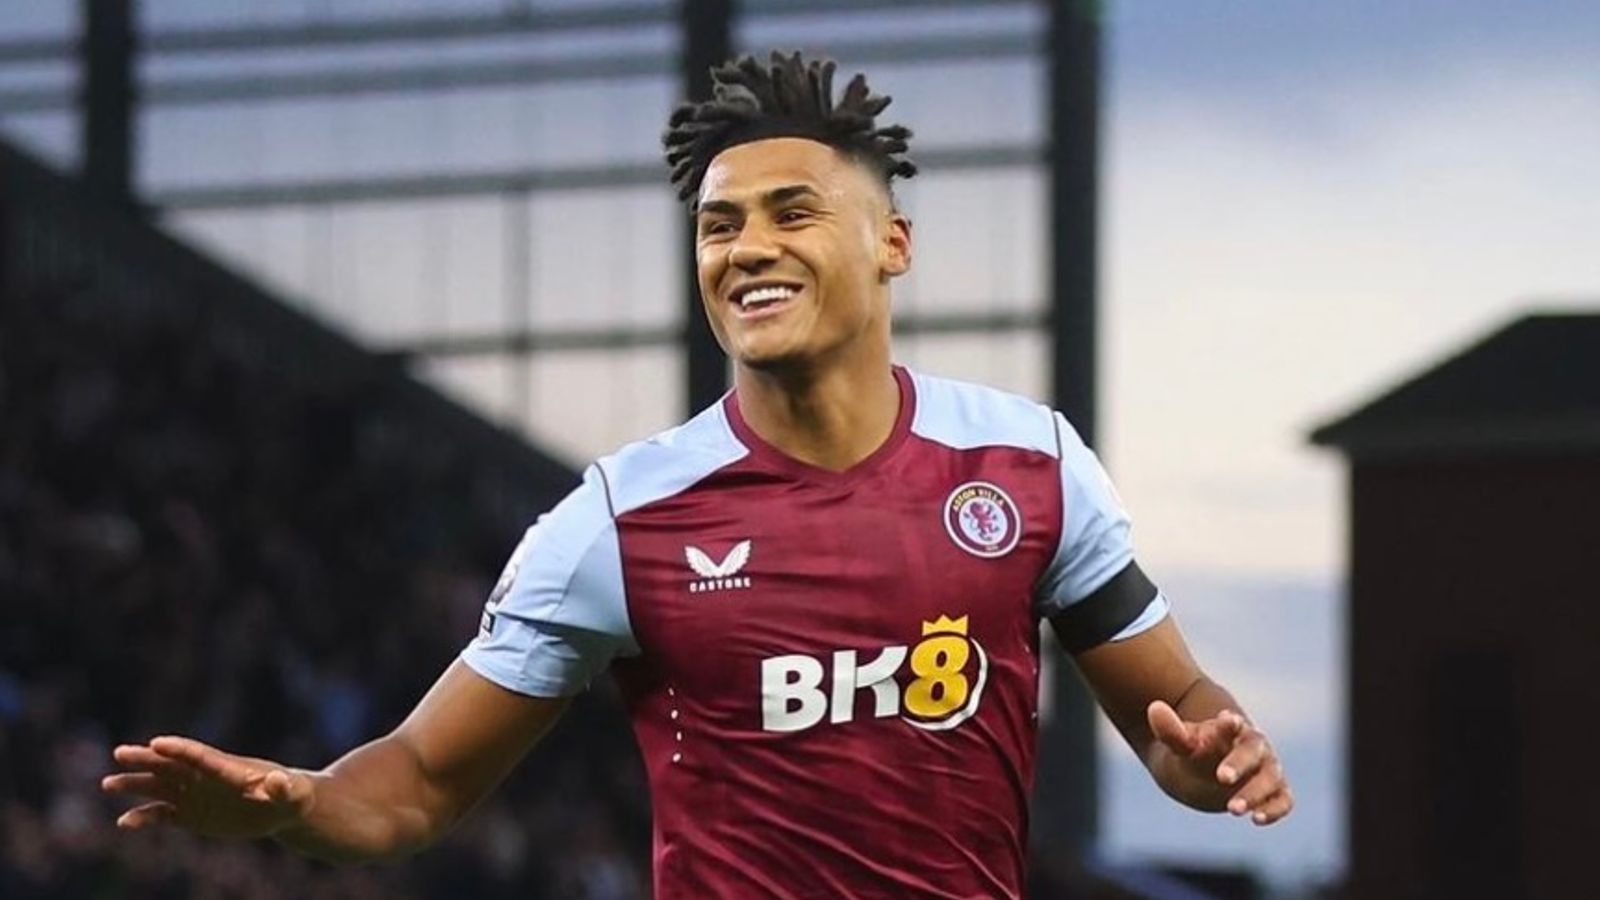 England striker Ollie Watkins aims to score with backing for sneaker platform